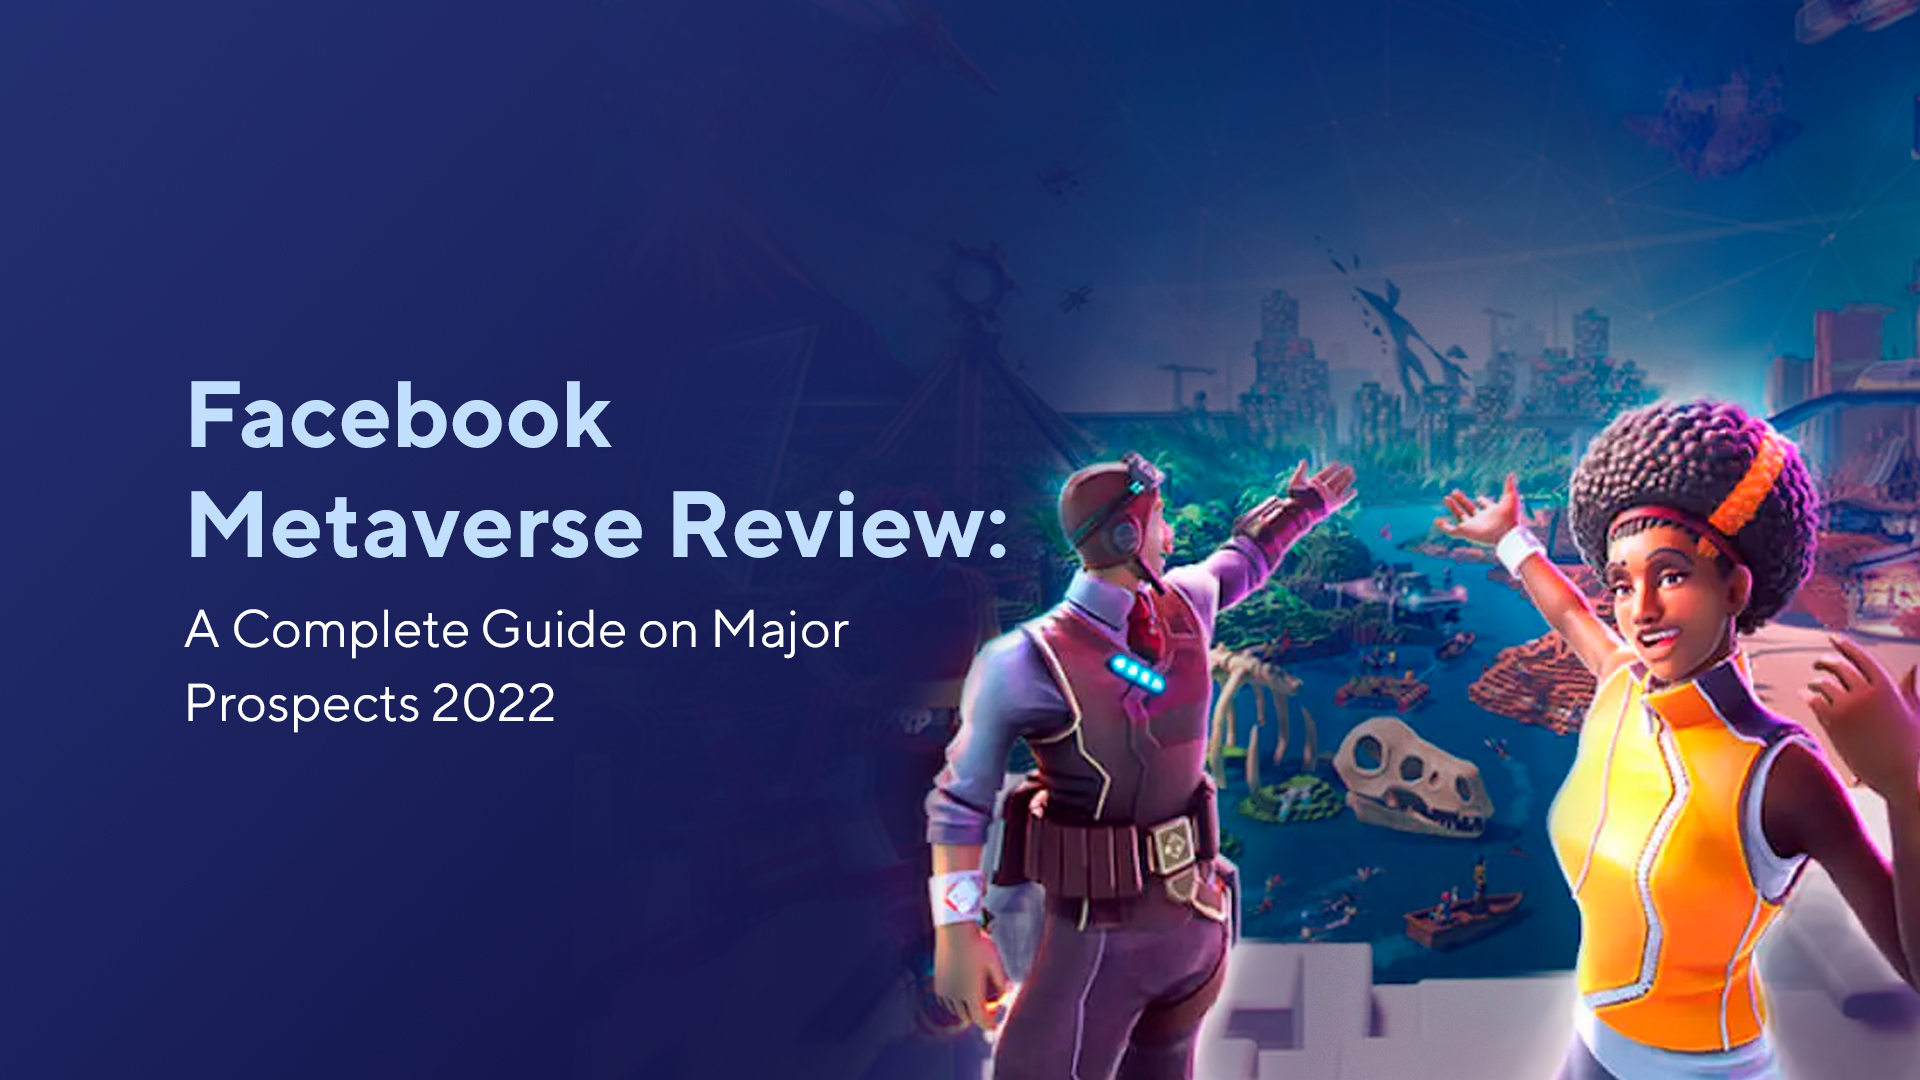 Facebook Metaverse Review: A Complete Guide on Major Prospects 2023